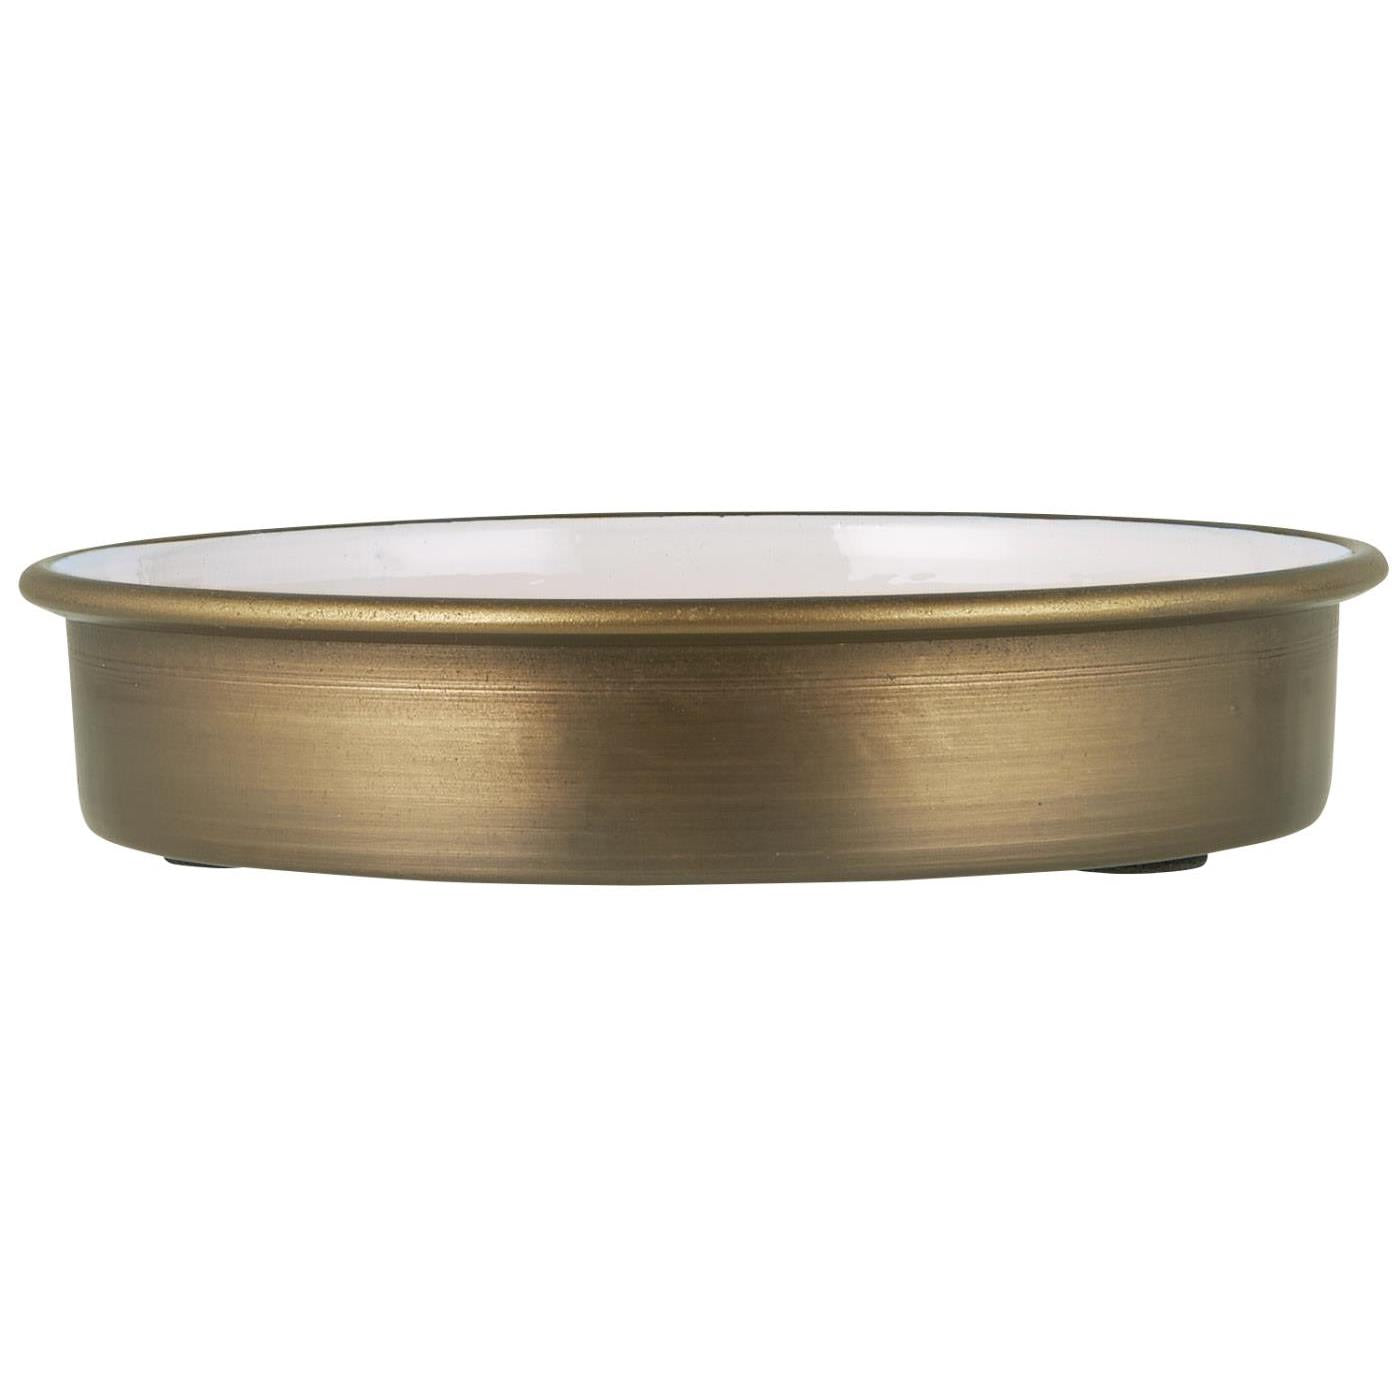 Candle tray - colored interior